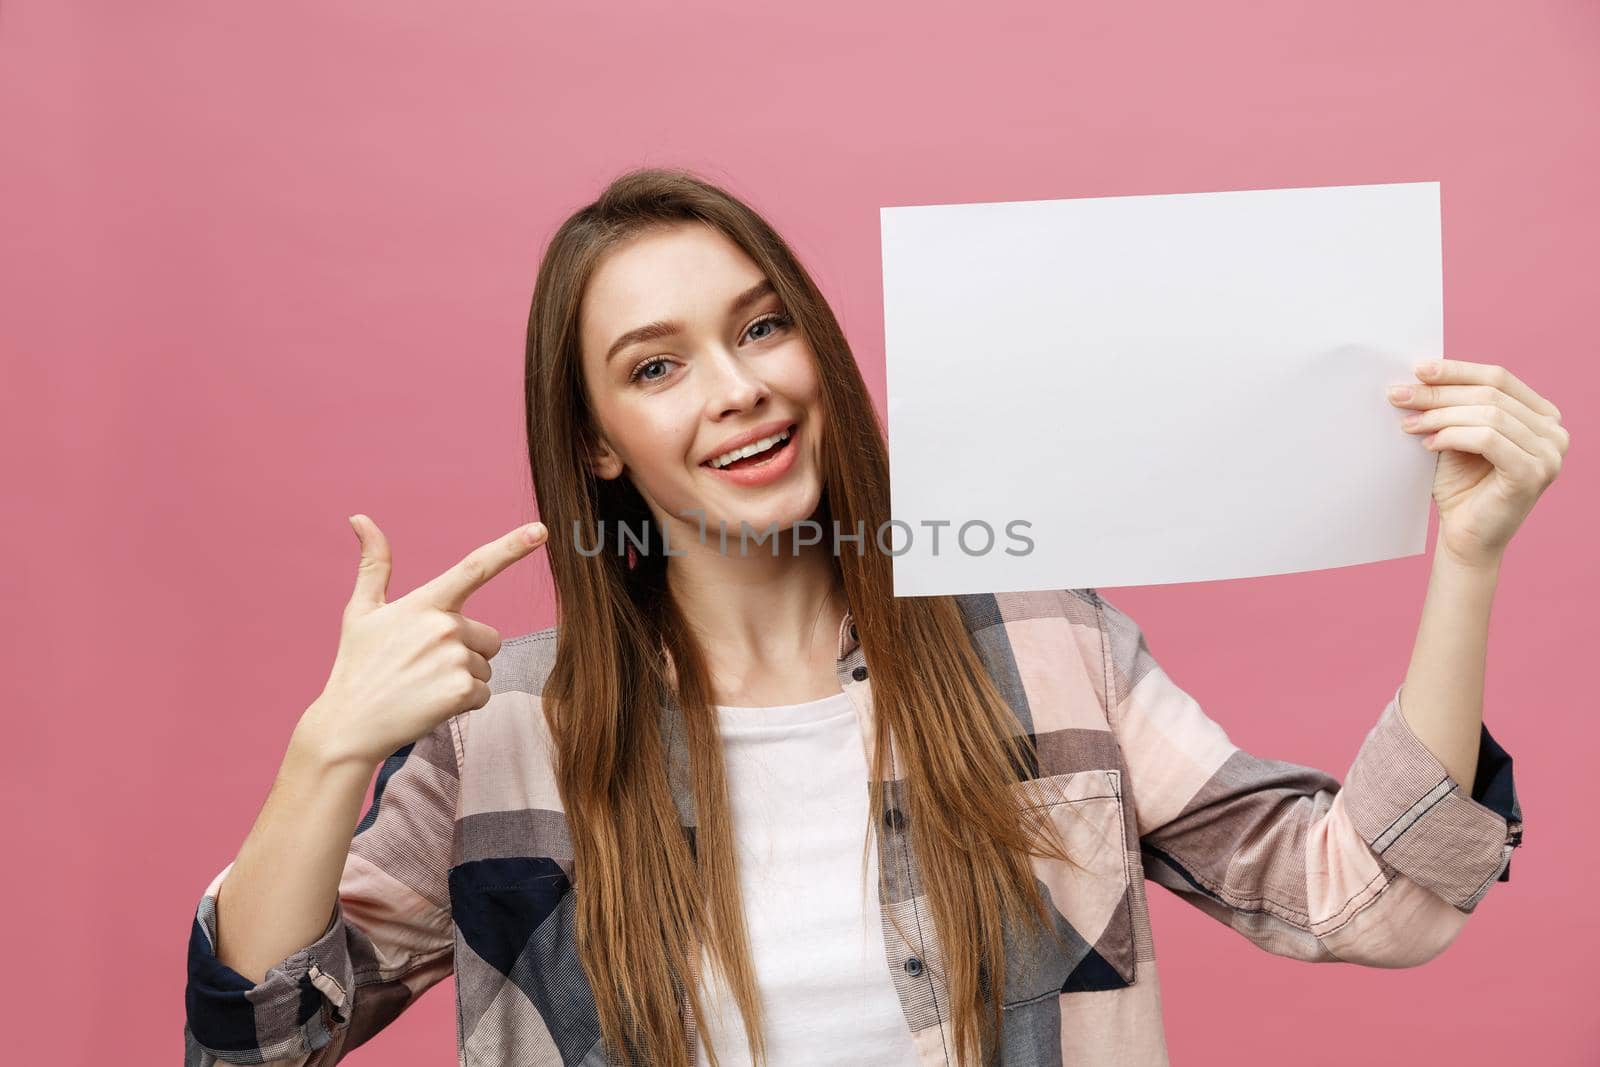 young smile woman standing pointing her finger at a blank board